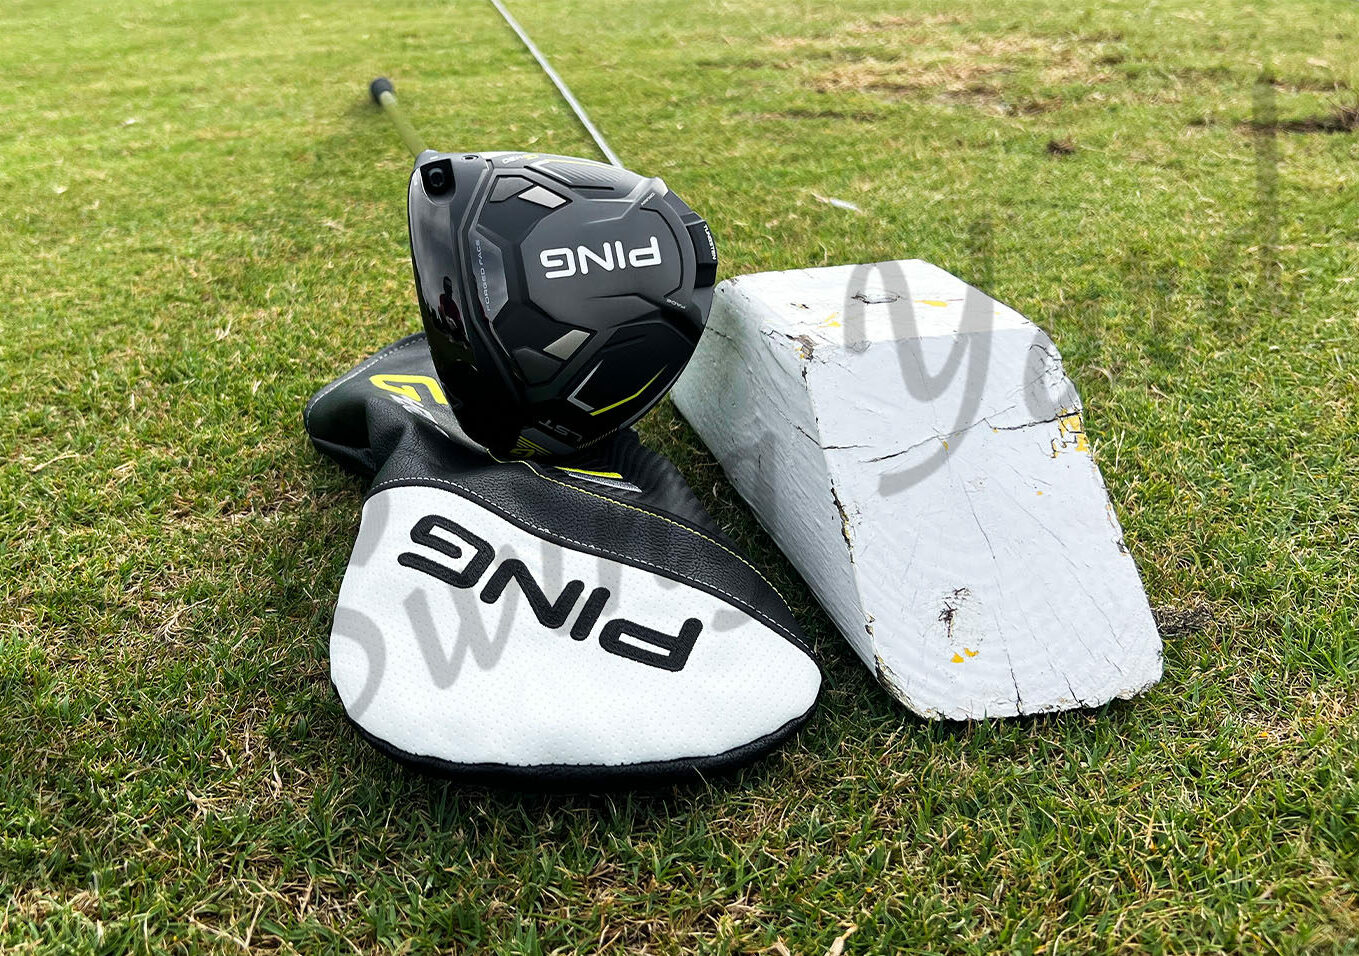 My new Ping G430 LST Driver with headcover at the golf course